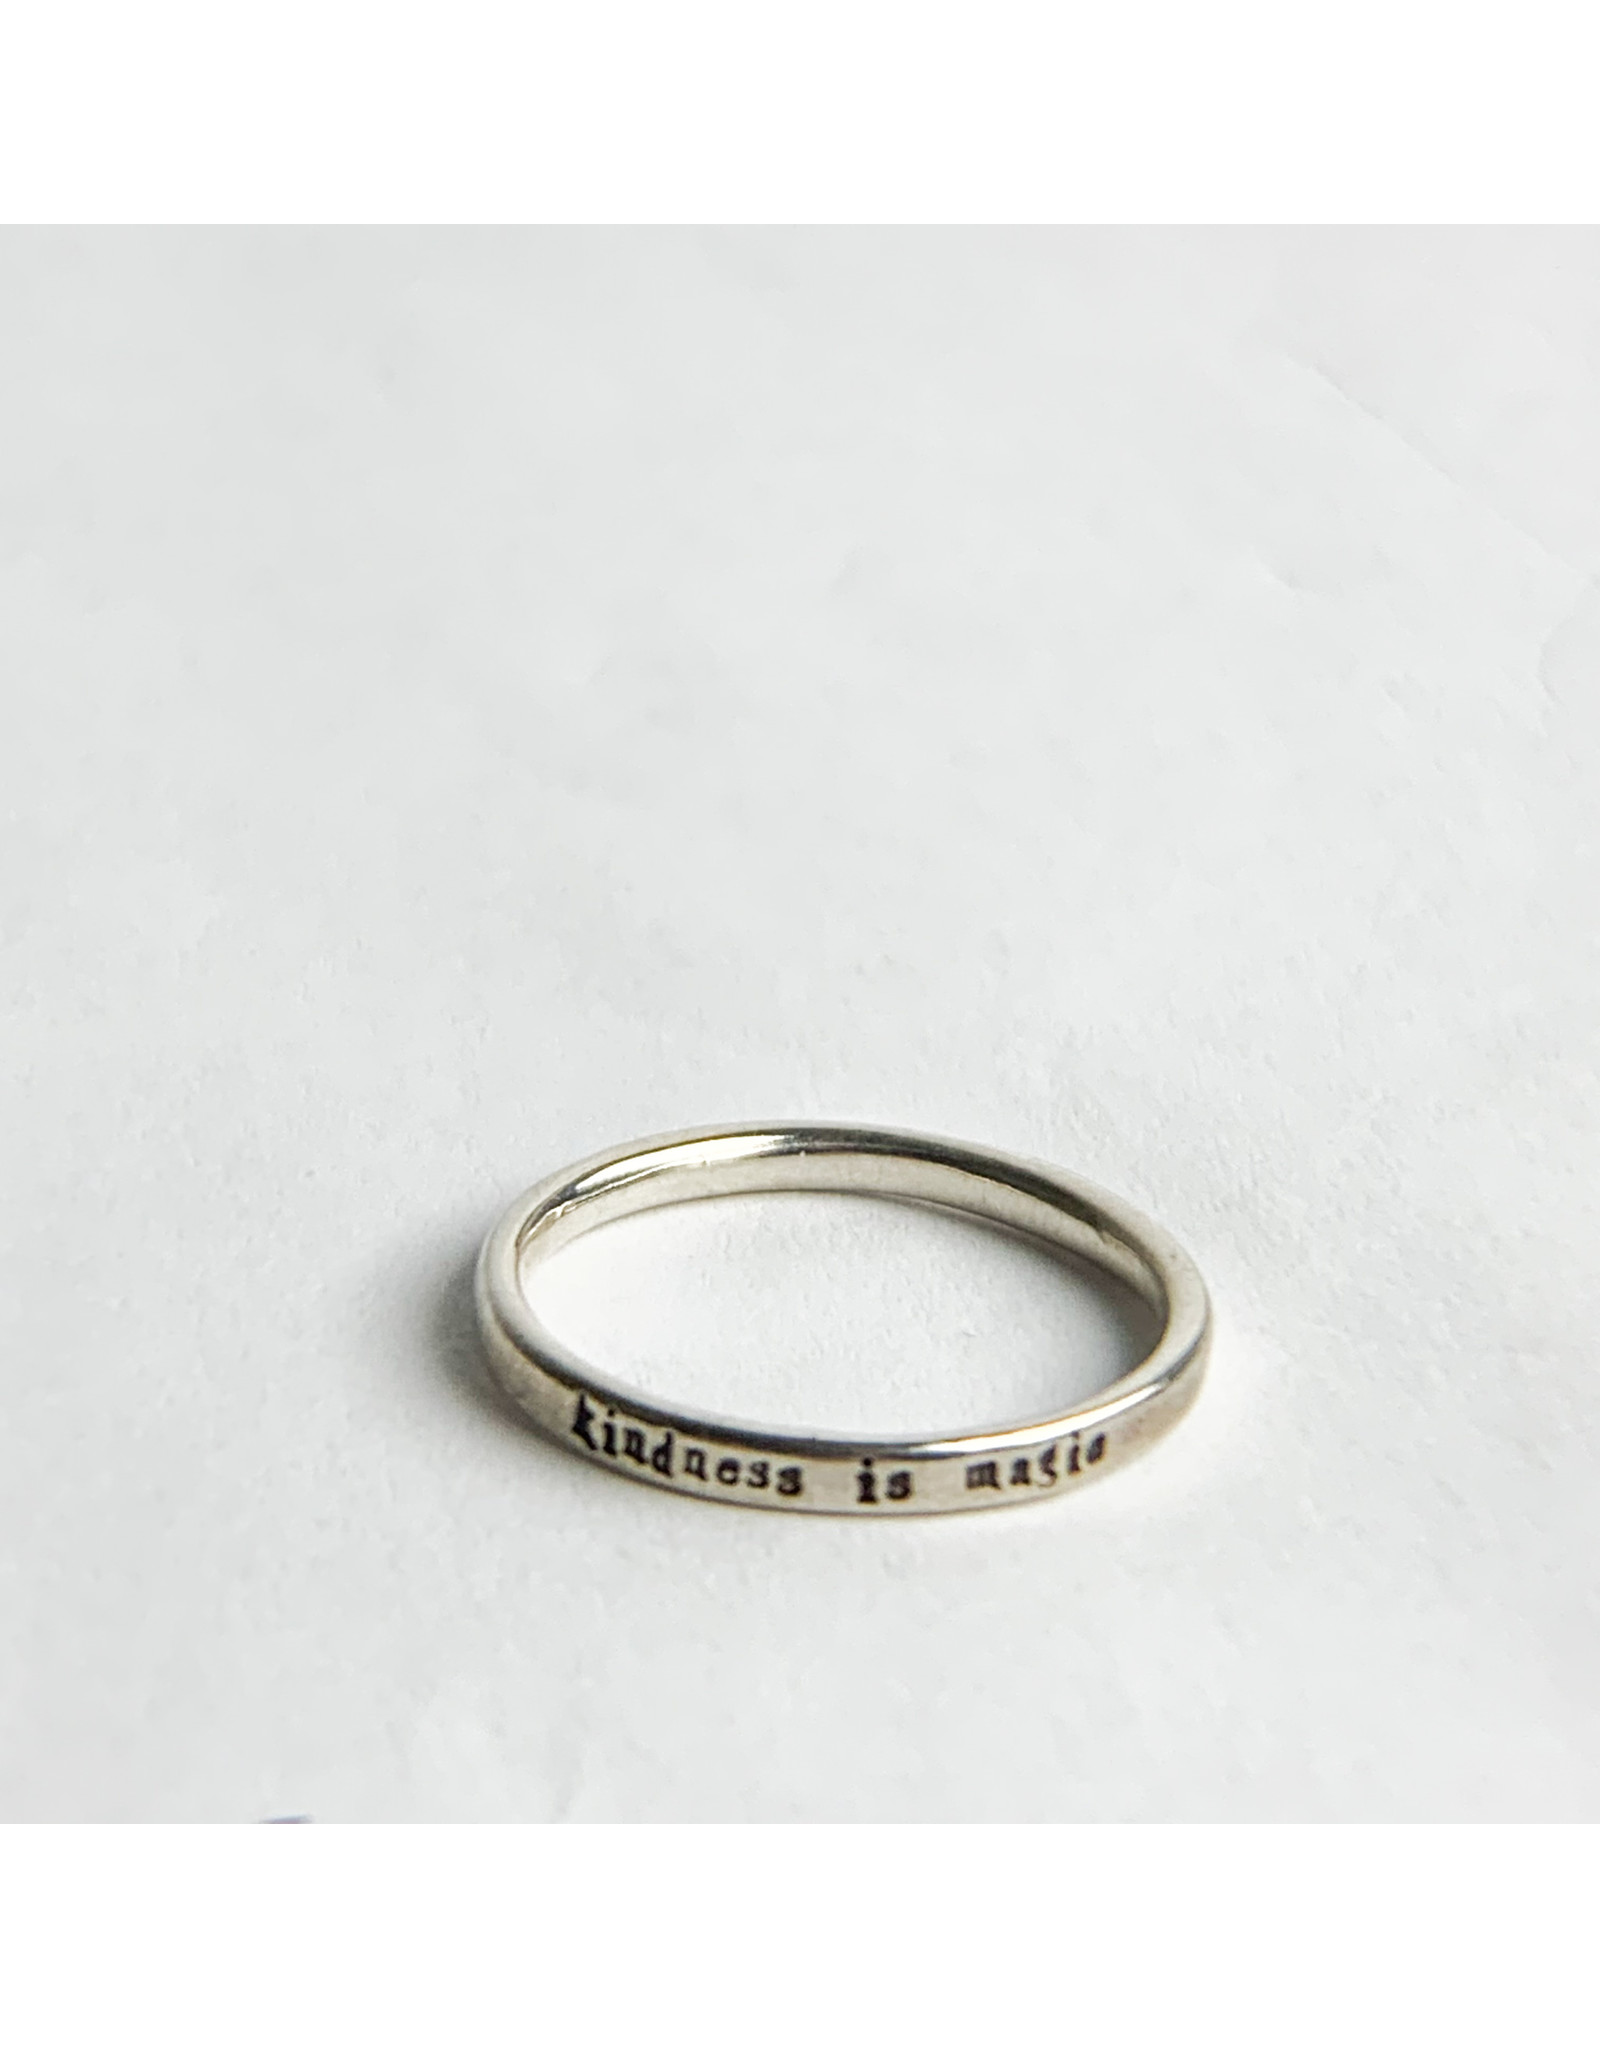 Everthine Jewelry Kindness Is Magic Ring